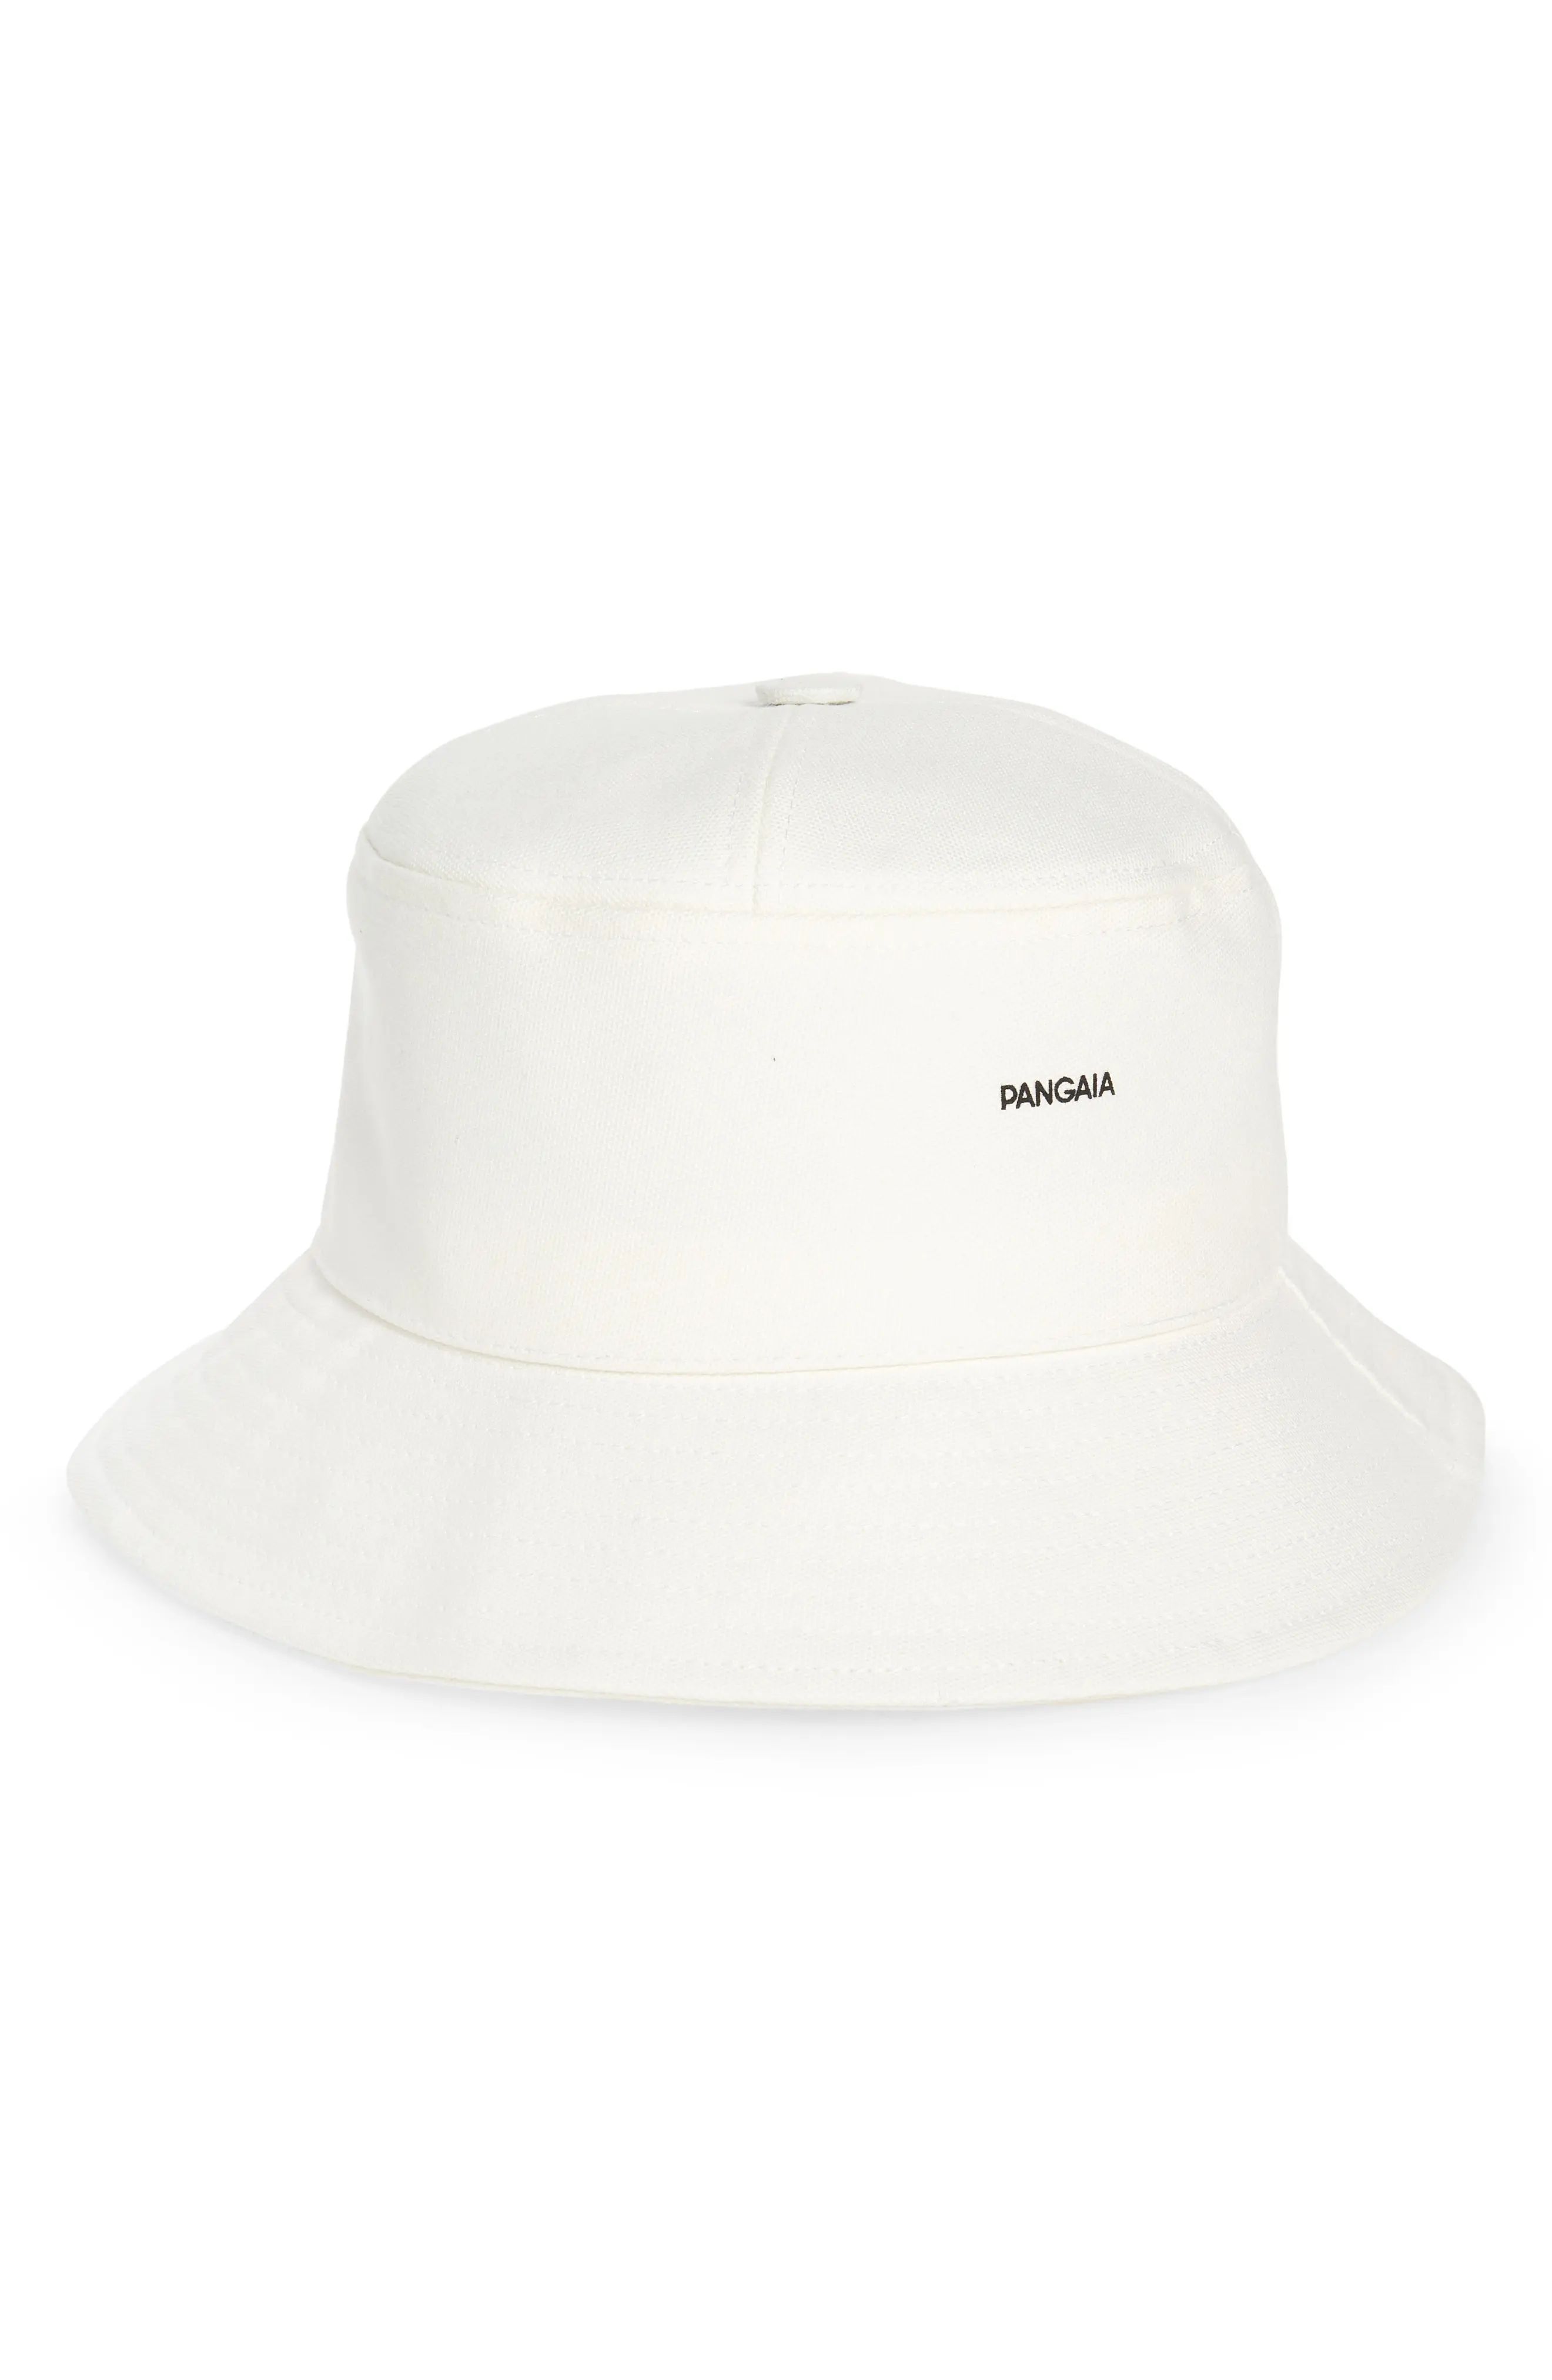 PANGAIA Organic Cotton Bucket Hat in Off-White at Nordstrom, Size Small | Nordstrom